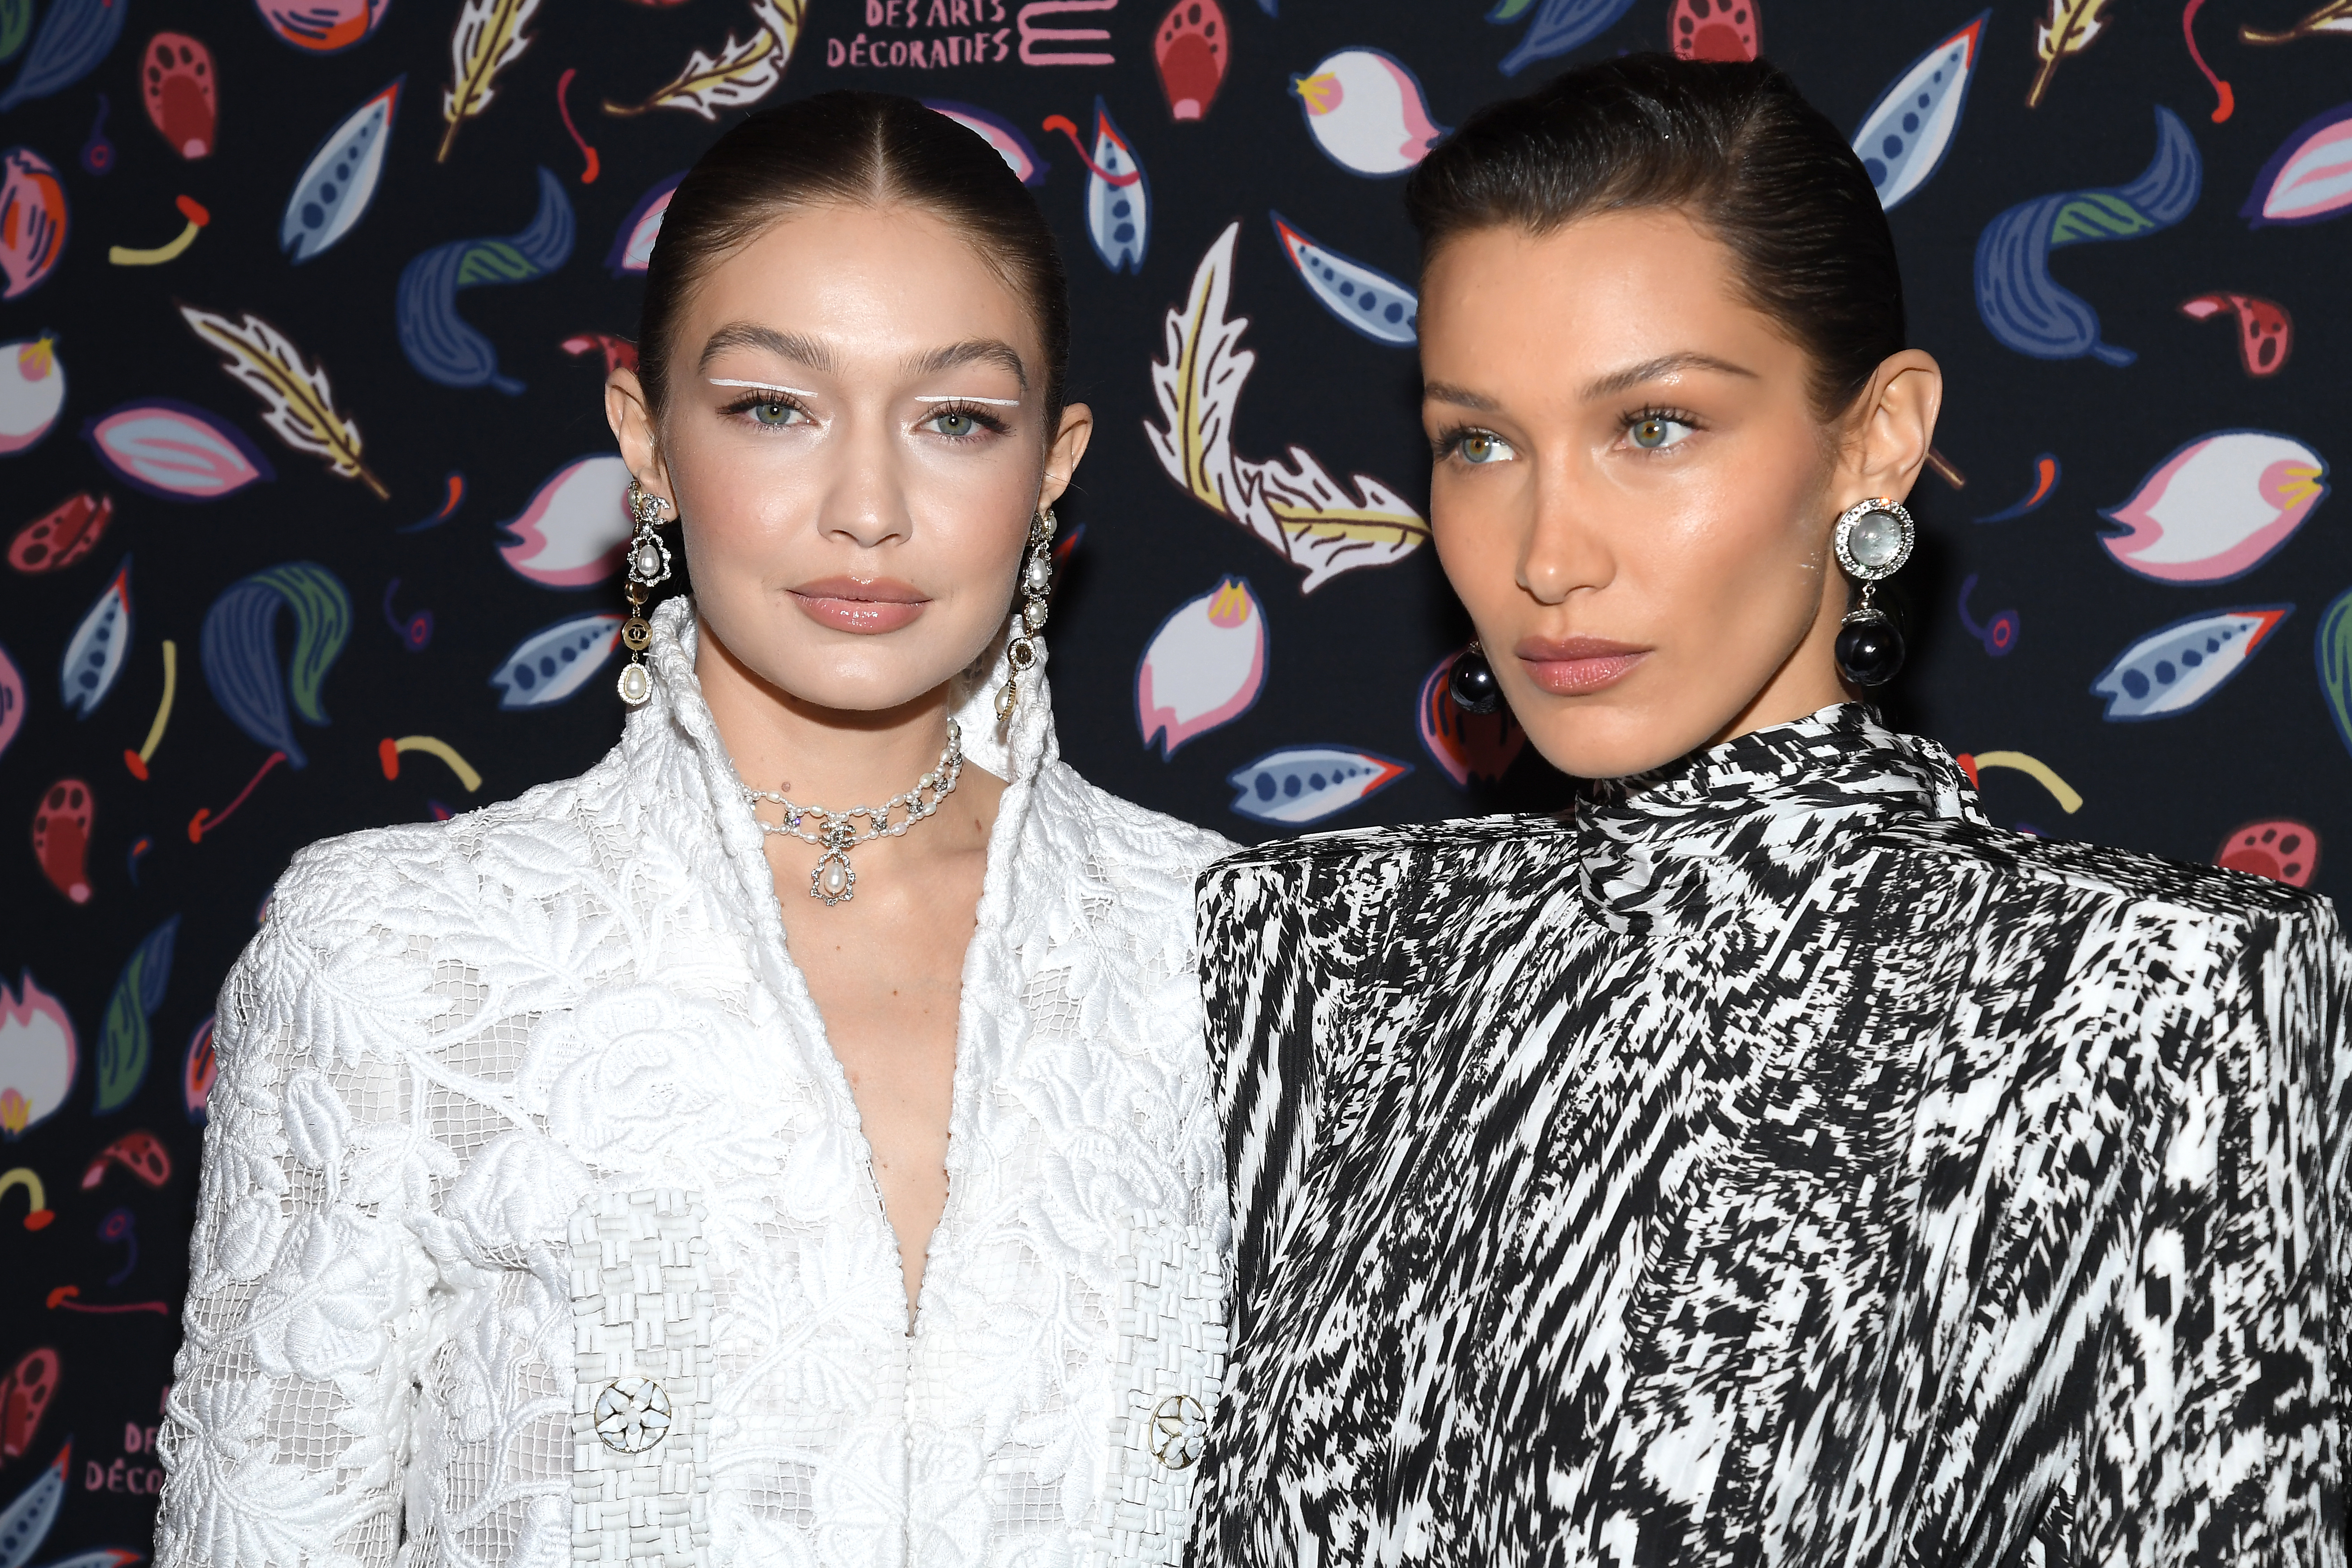 Bella Hadid Mourns For Palestinians and Israelis Amid War